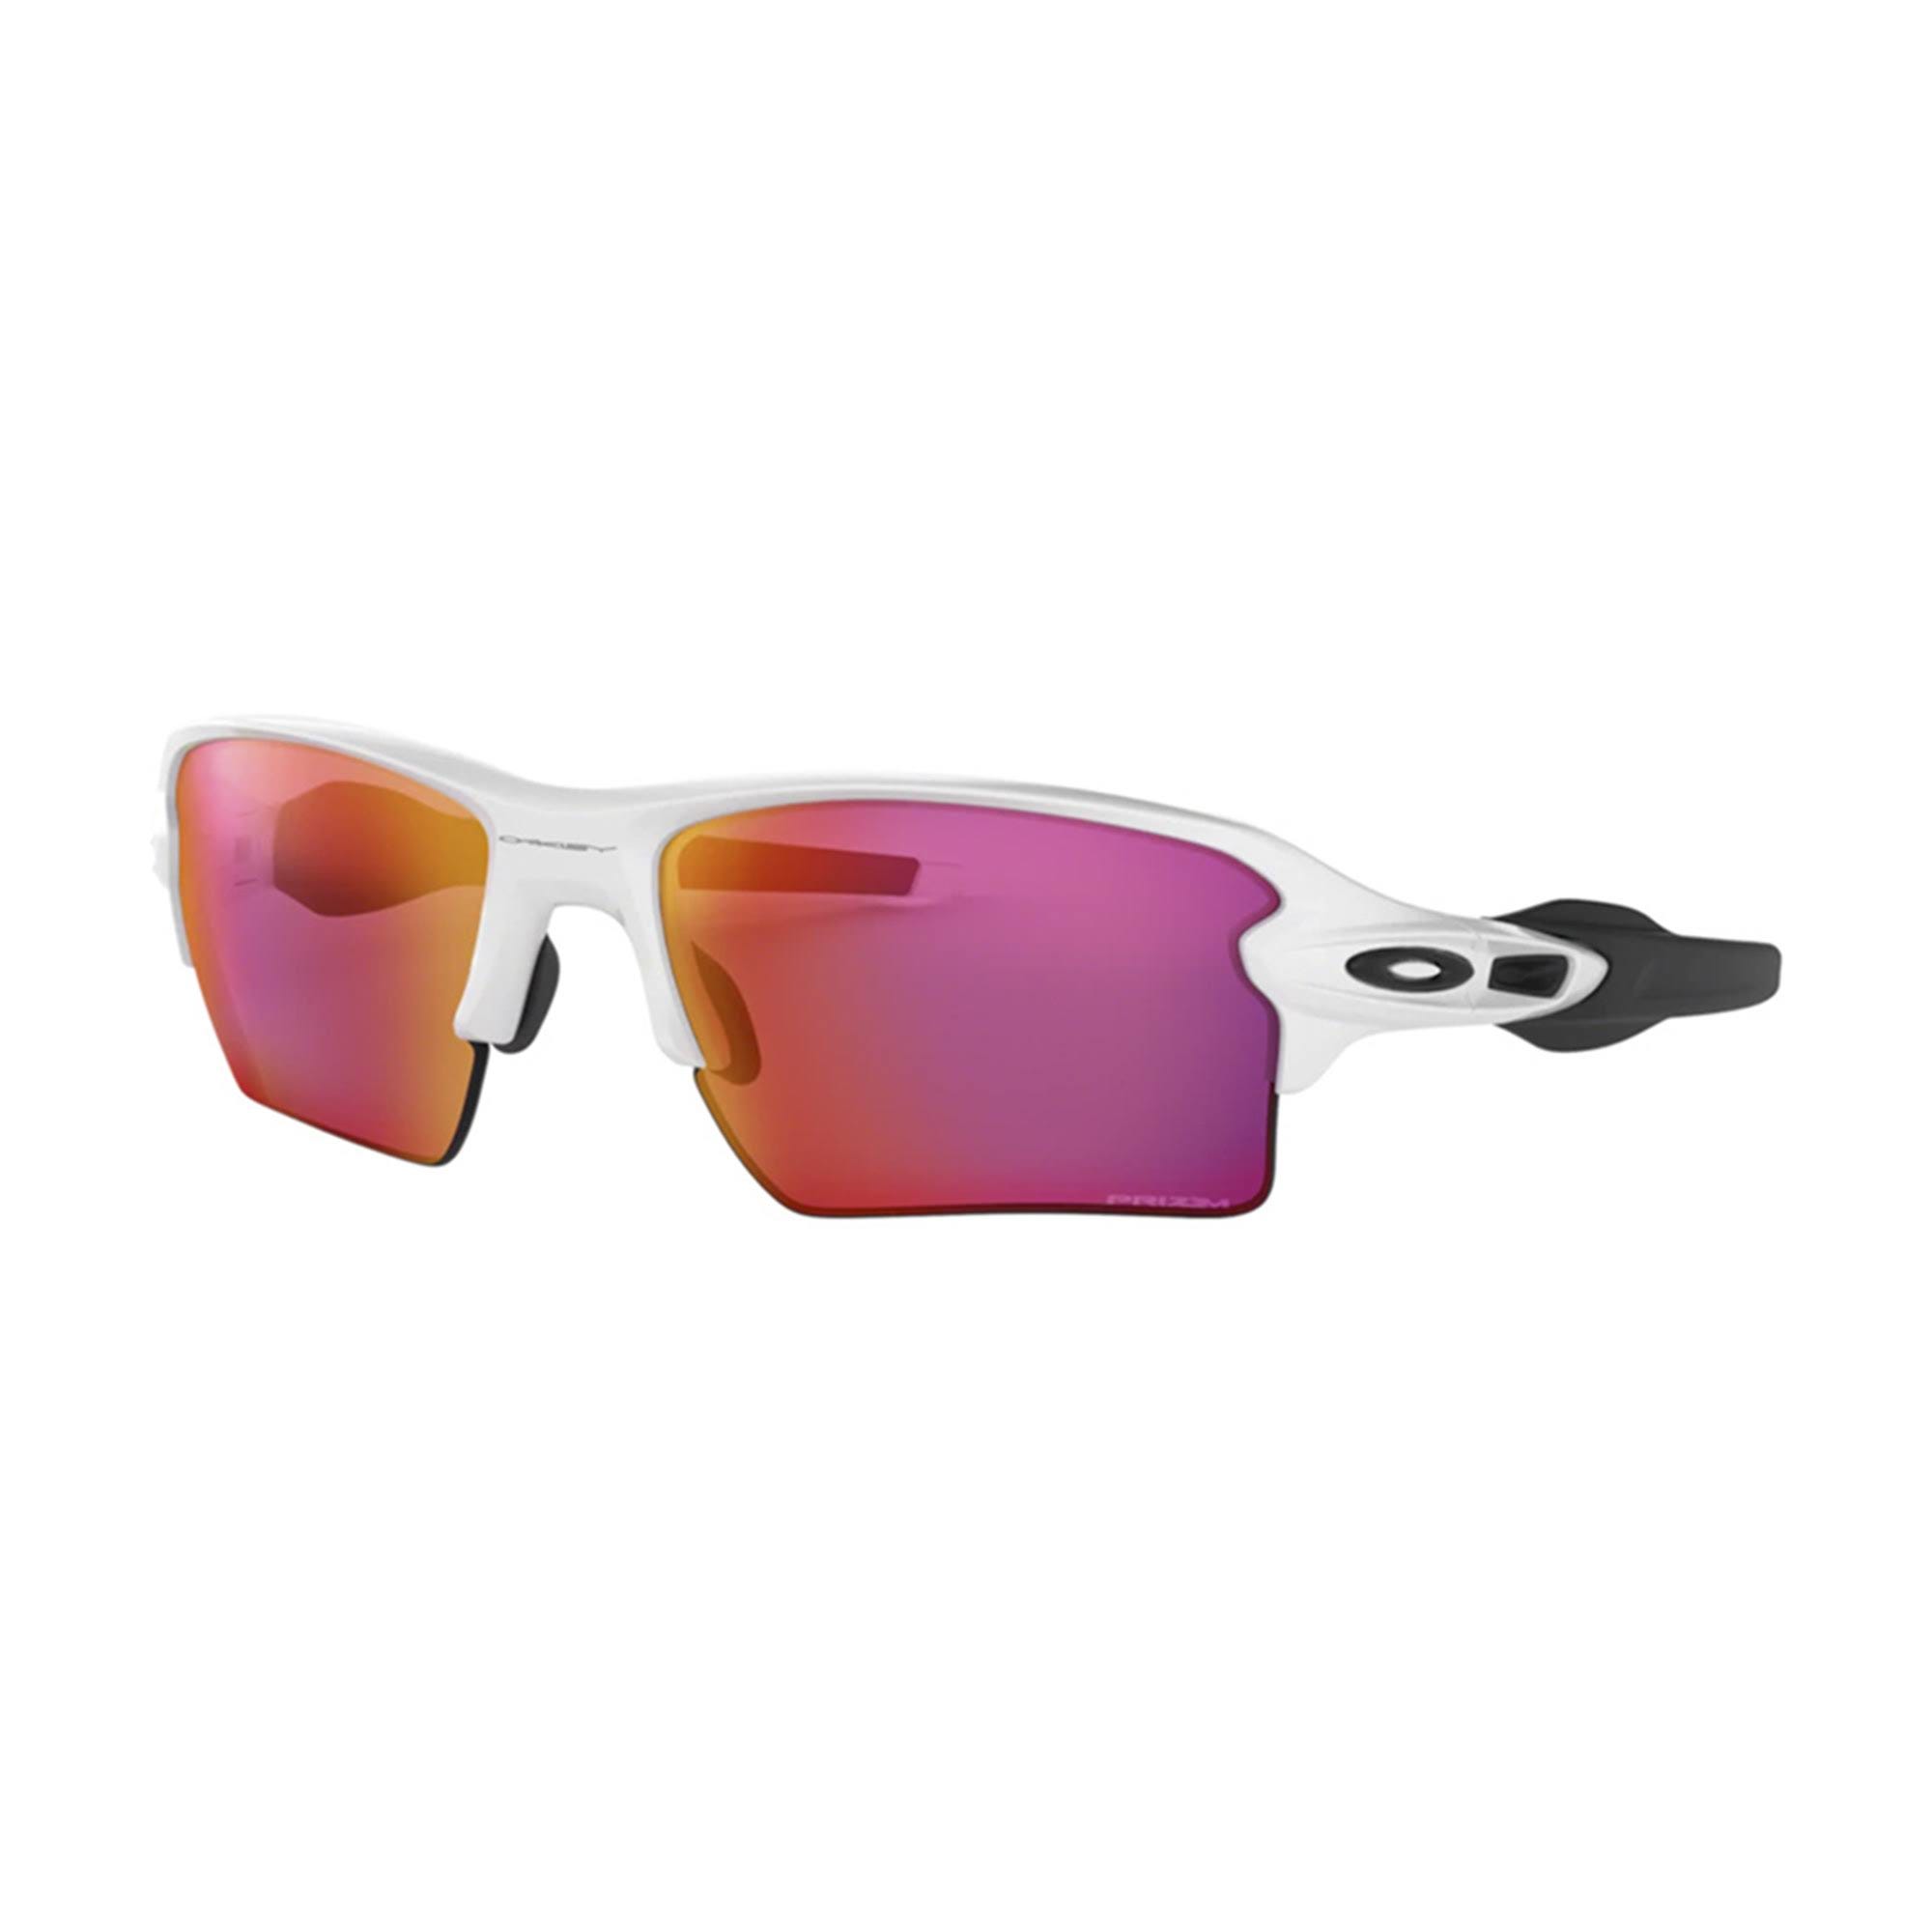 Oakley Flak 2.0 XL Polished White Sunglasses with Prizm Field Lens | Image